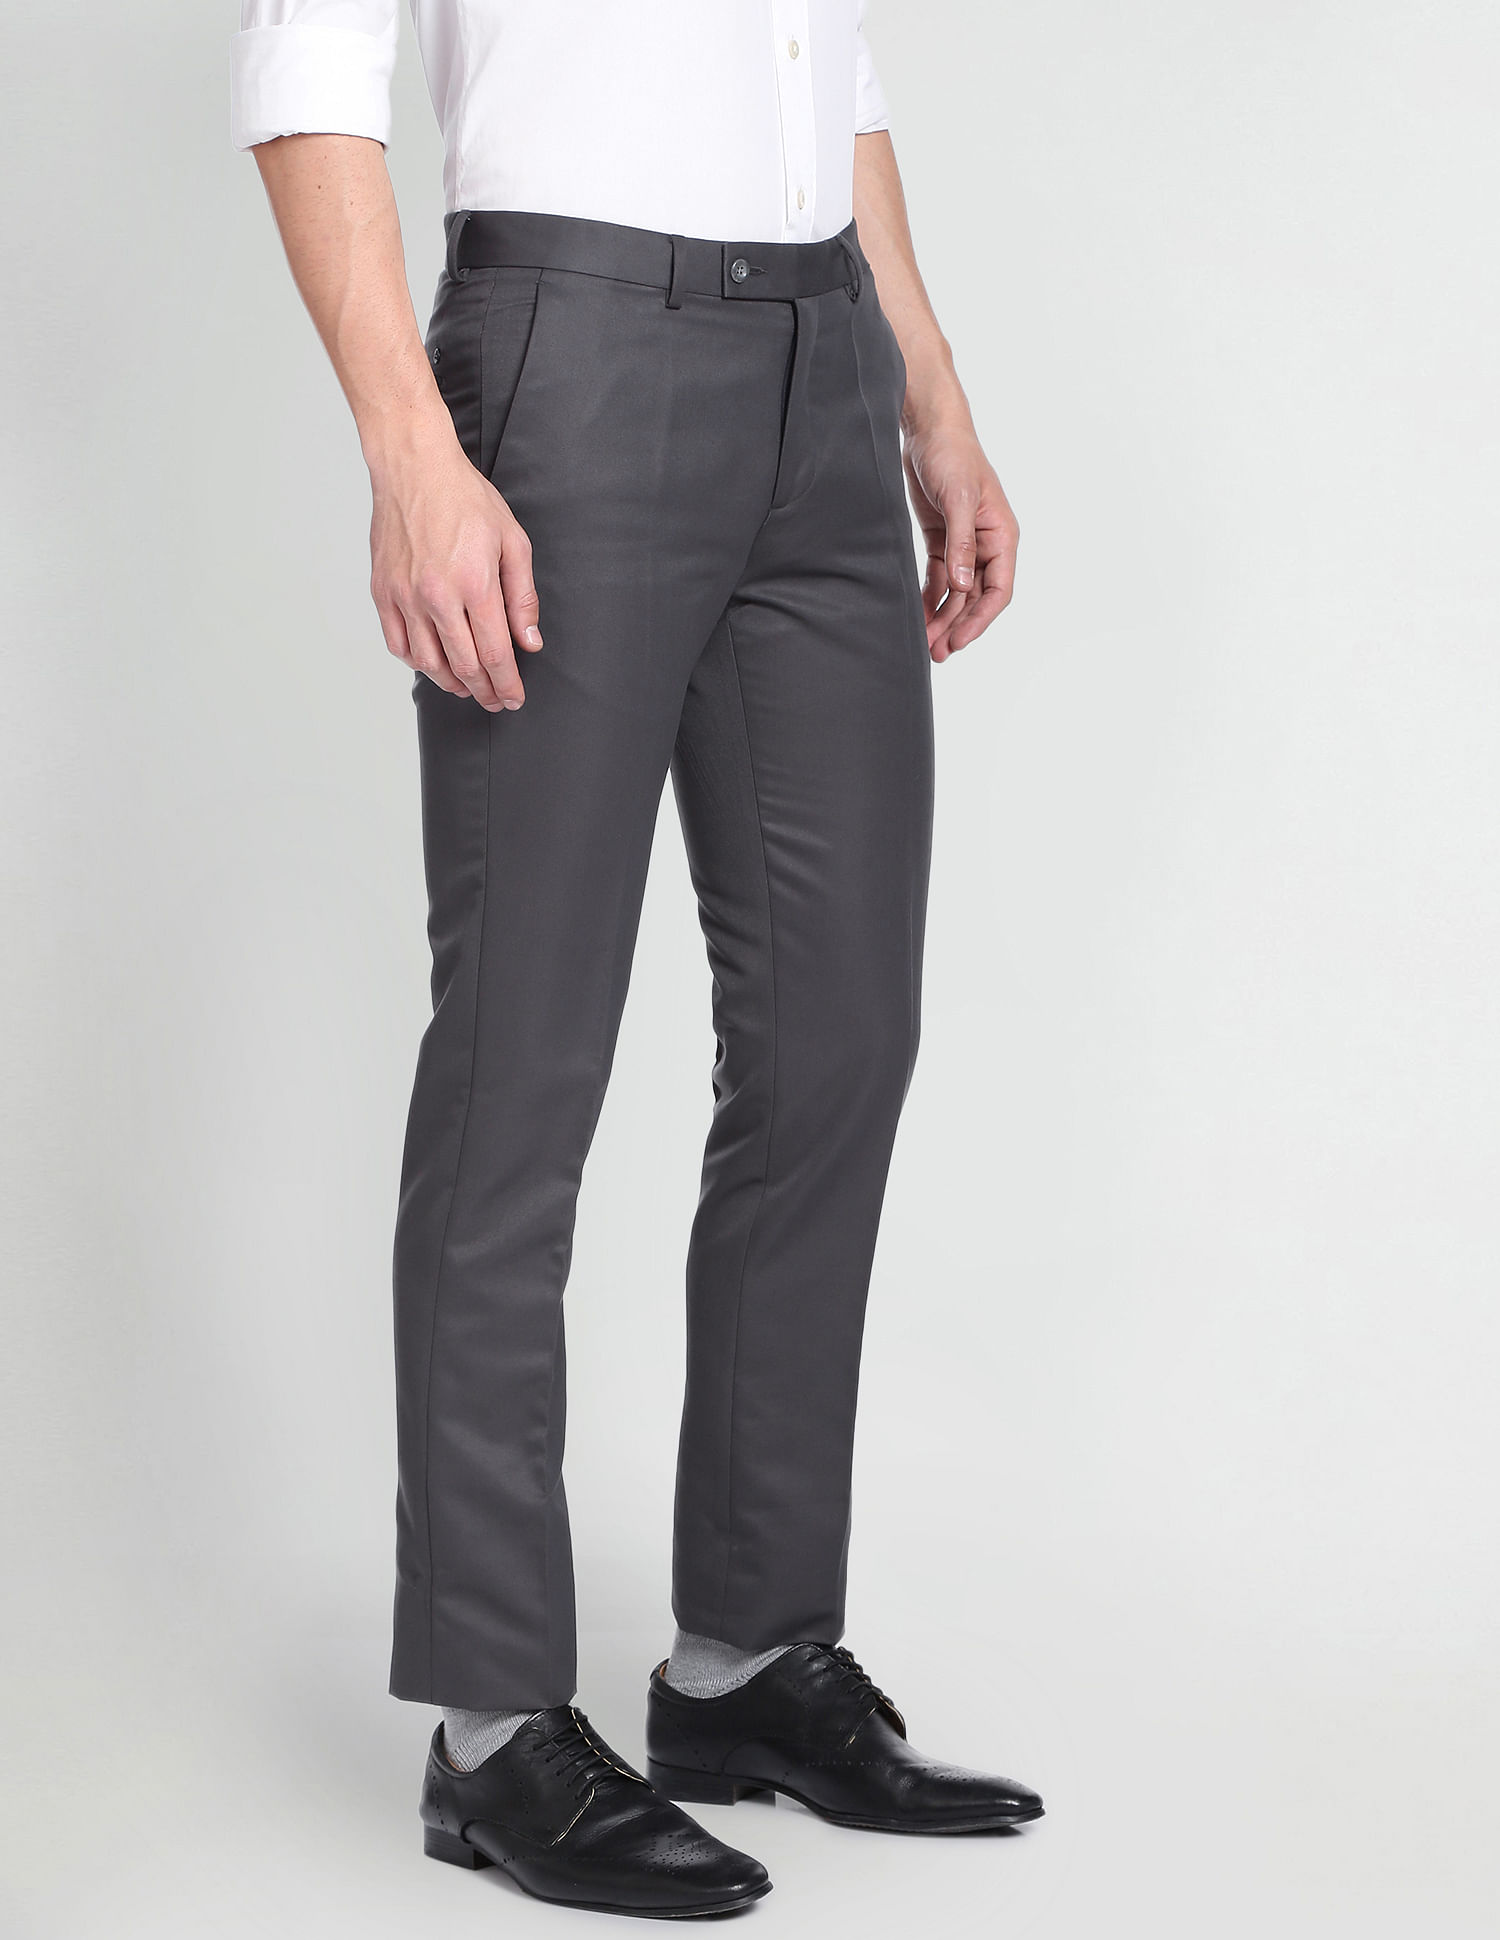 Women´s Grey Pants | Explore our New Arrivals | ZARA United States